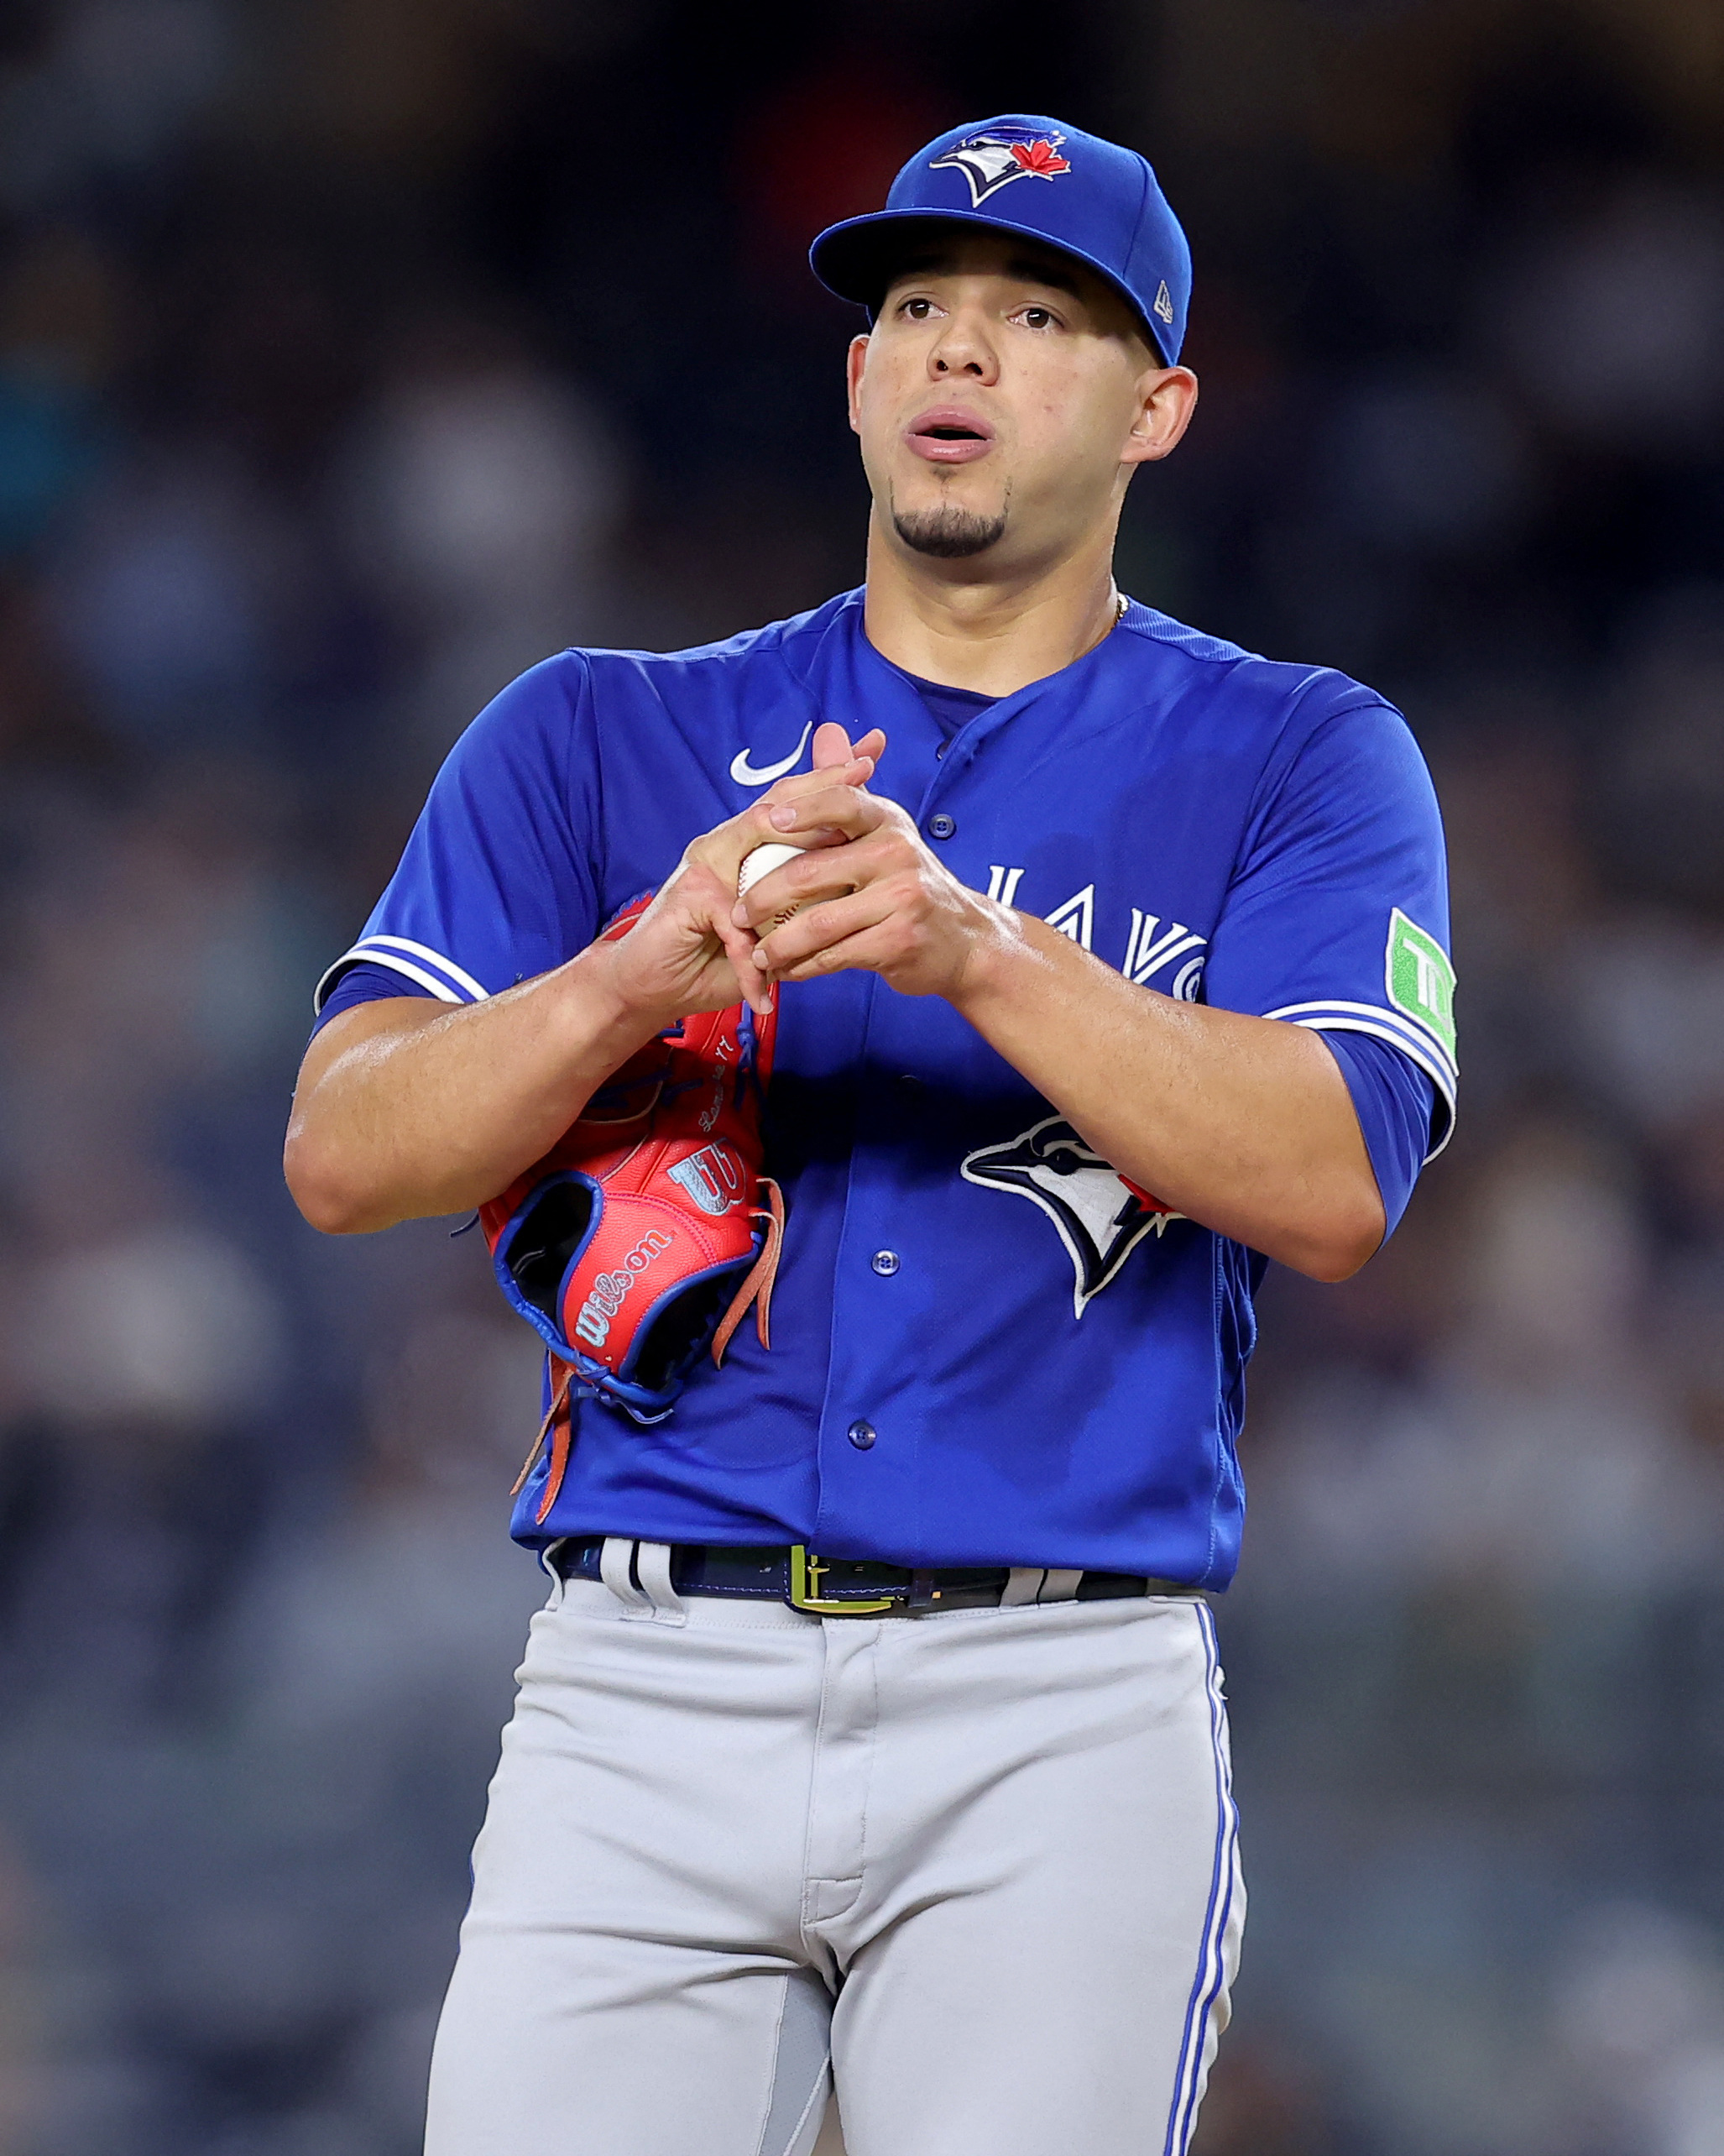 A move by the Blue Jays shows one of the Yankees' biggest